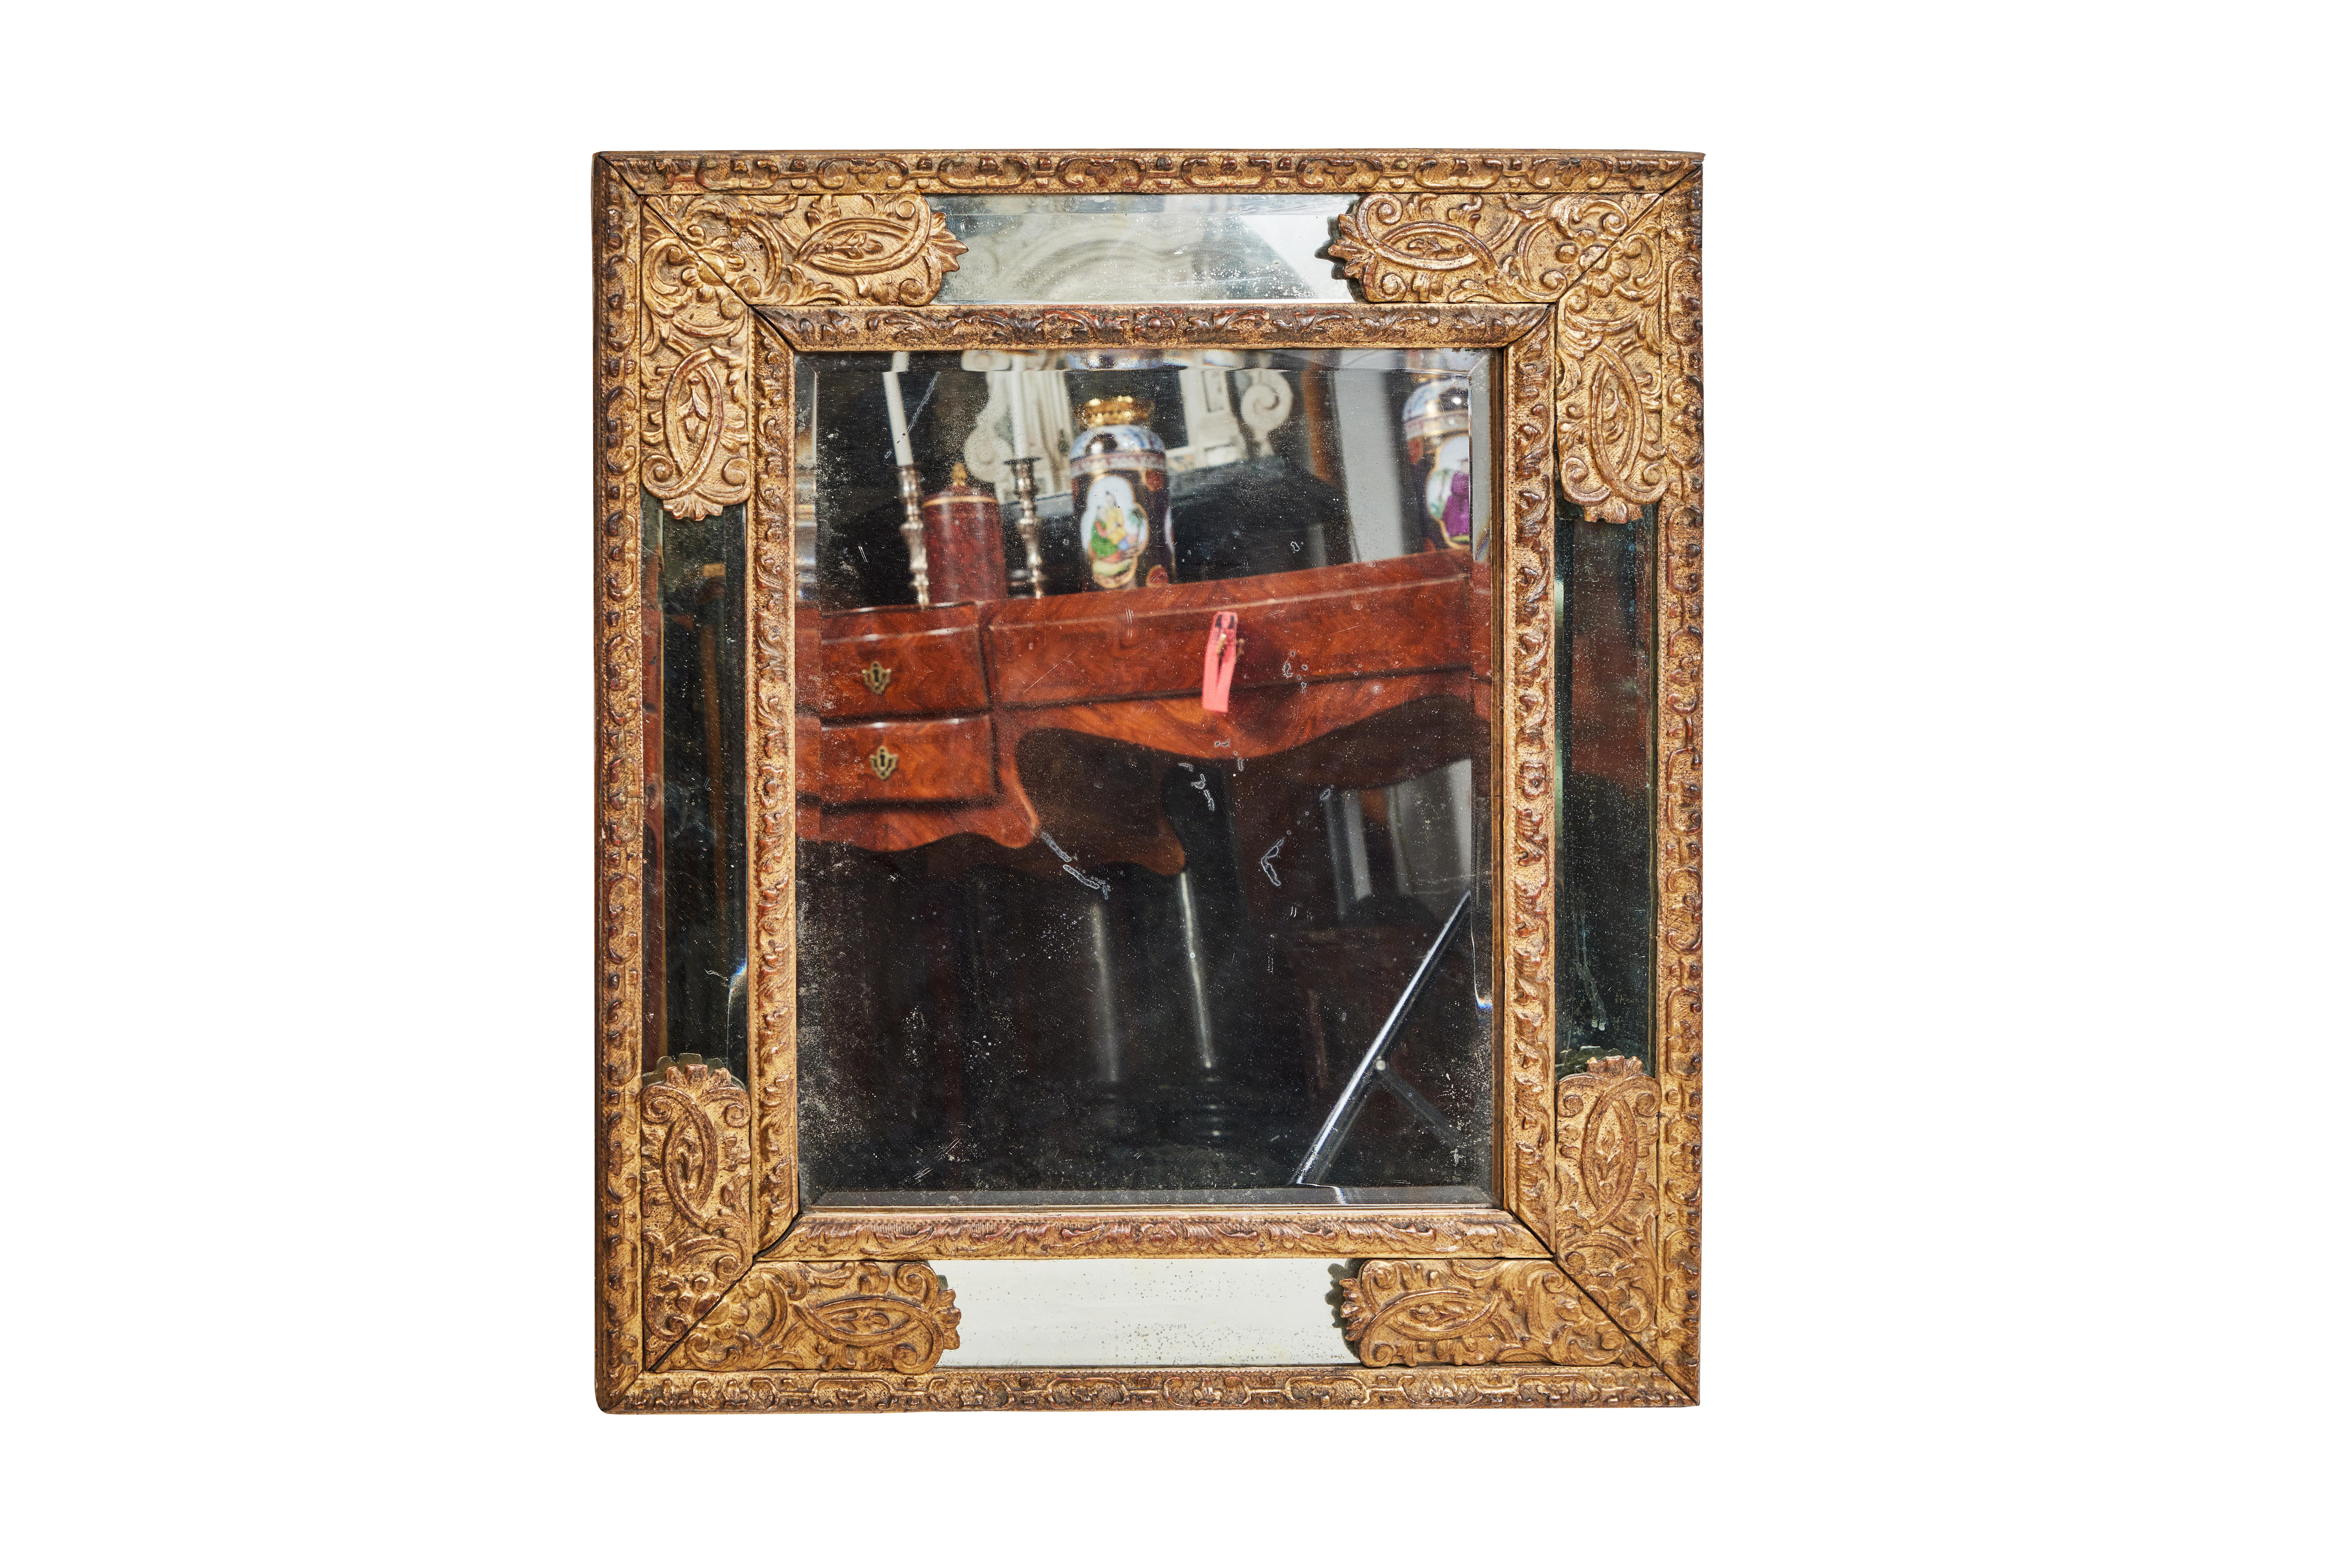 A completely original, turn-of-the-19th century mirror with hand-carved, gessoed and gold gilded foliate embellished over-frame. Private collection, Northern Italy.